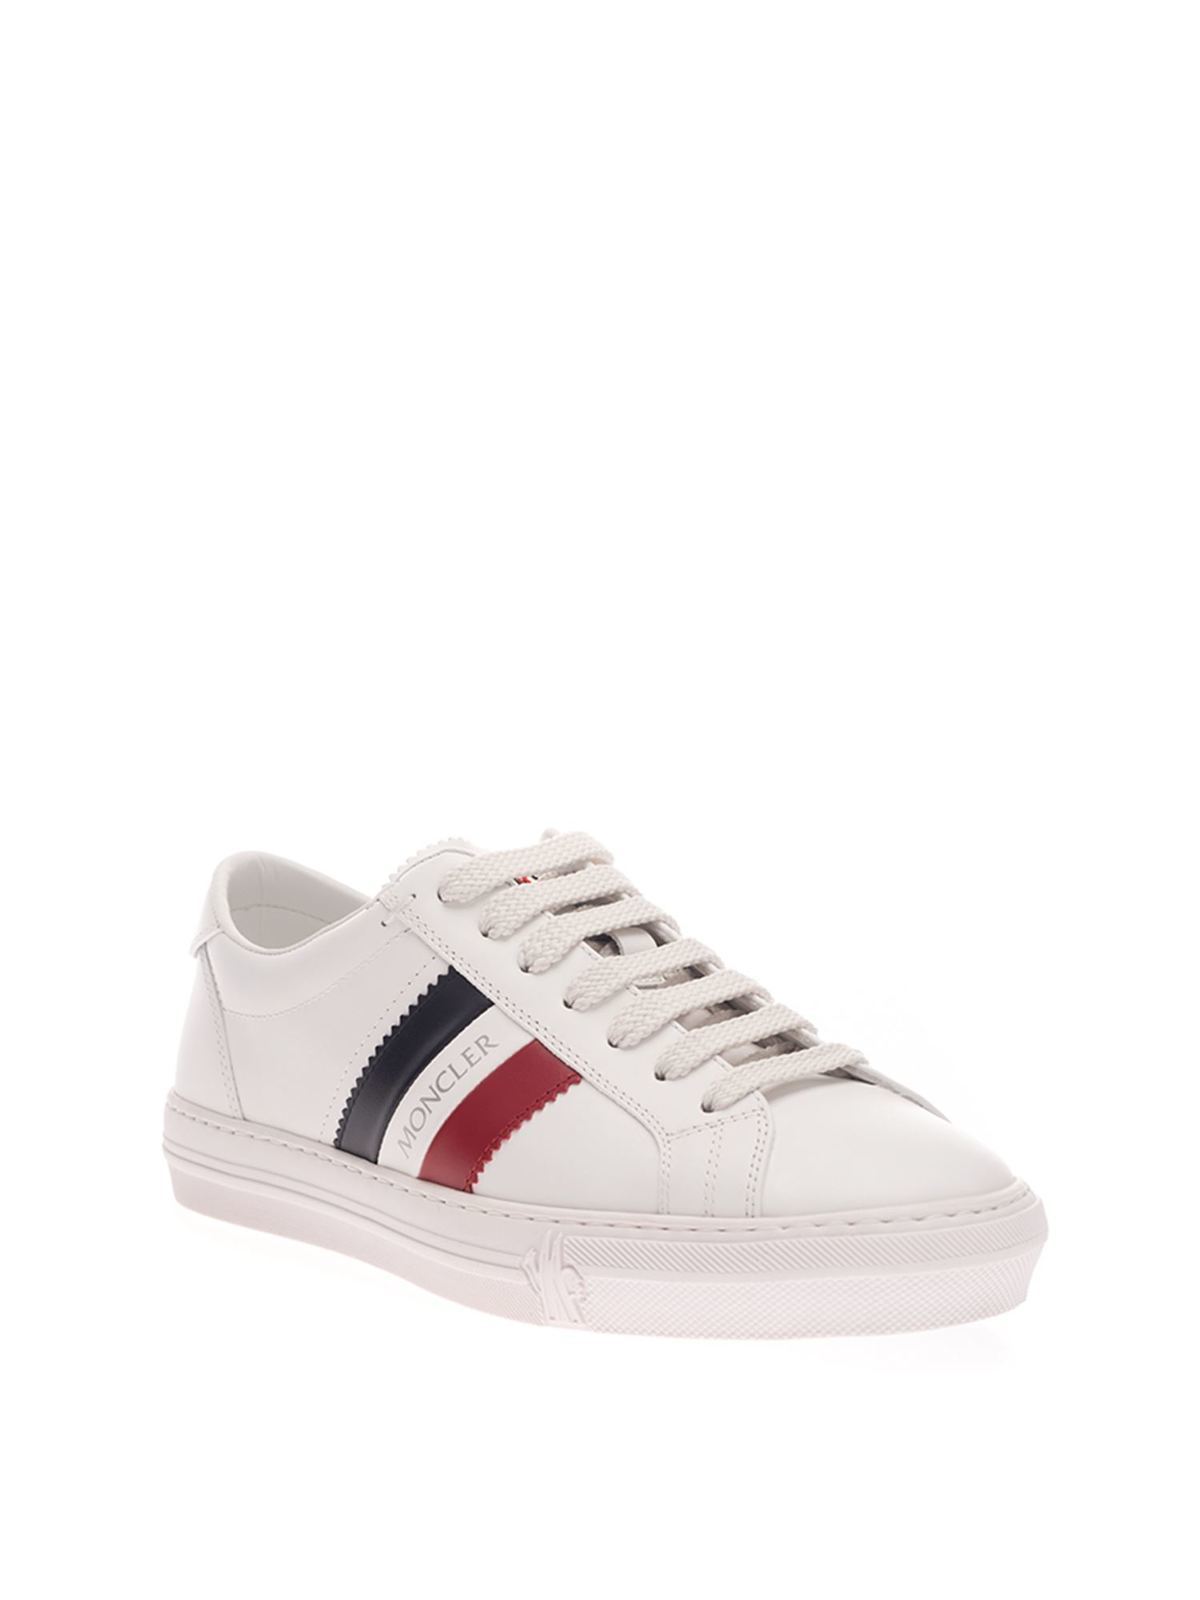 Moncler - Sneakers New Monaco in pelle - sneakers - 4M7144601A9A002